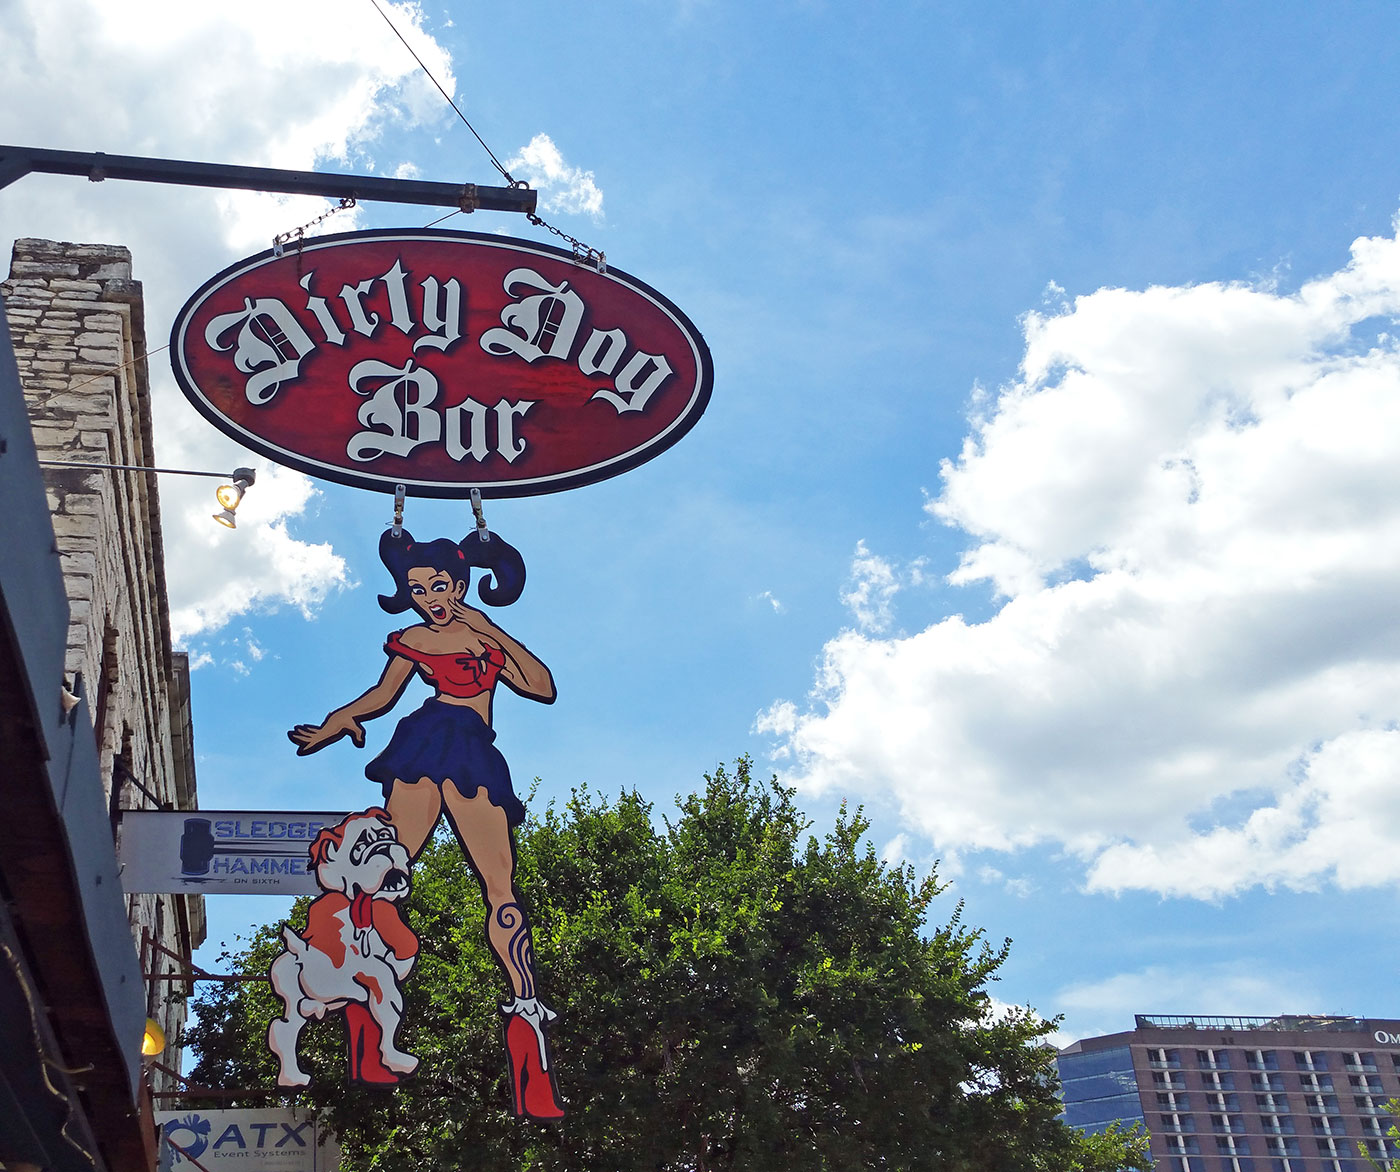 The Dirty Dog Bar in downtown Austin